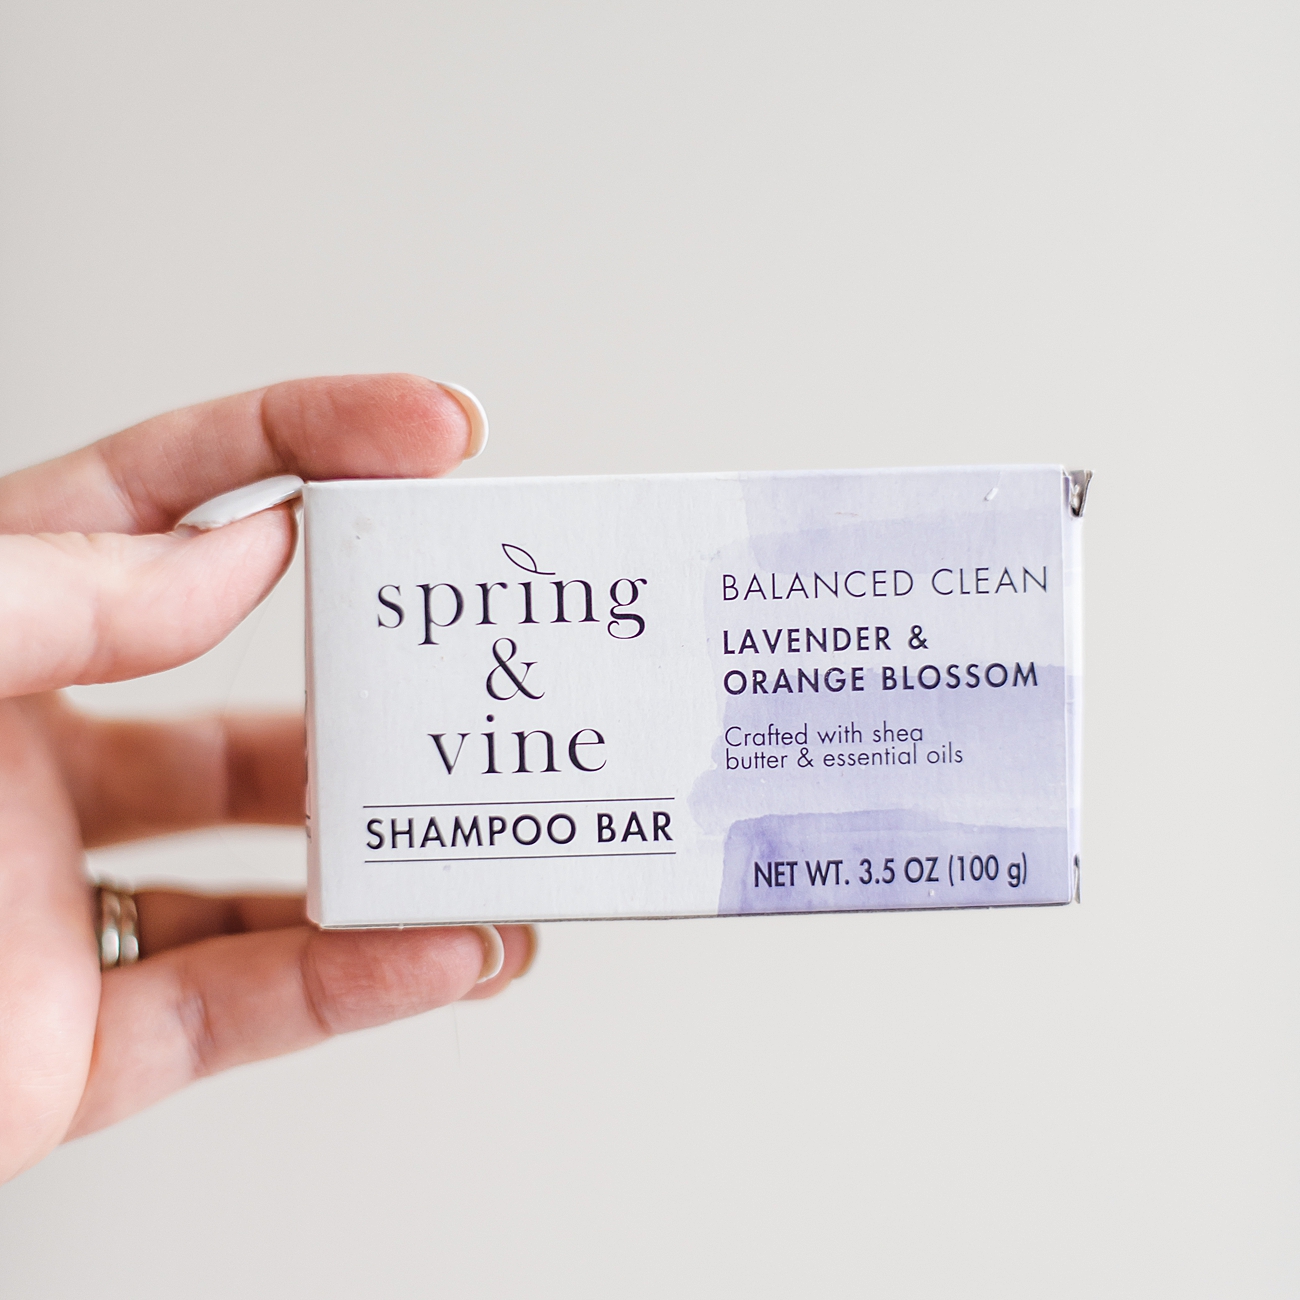 I Tried A Shampoo Bar You Can Get At Target! Here are my thoughts... | Spring and Vine Shampoo Bar Review